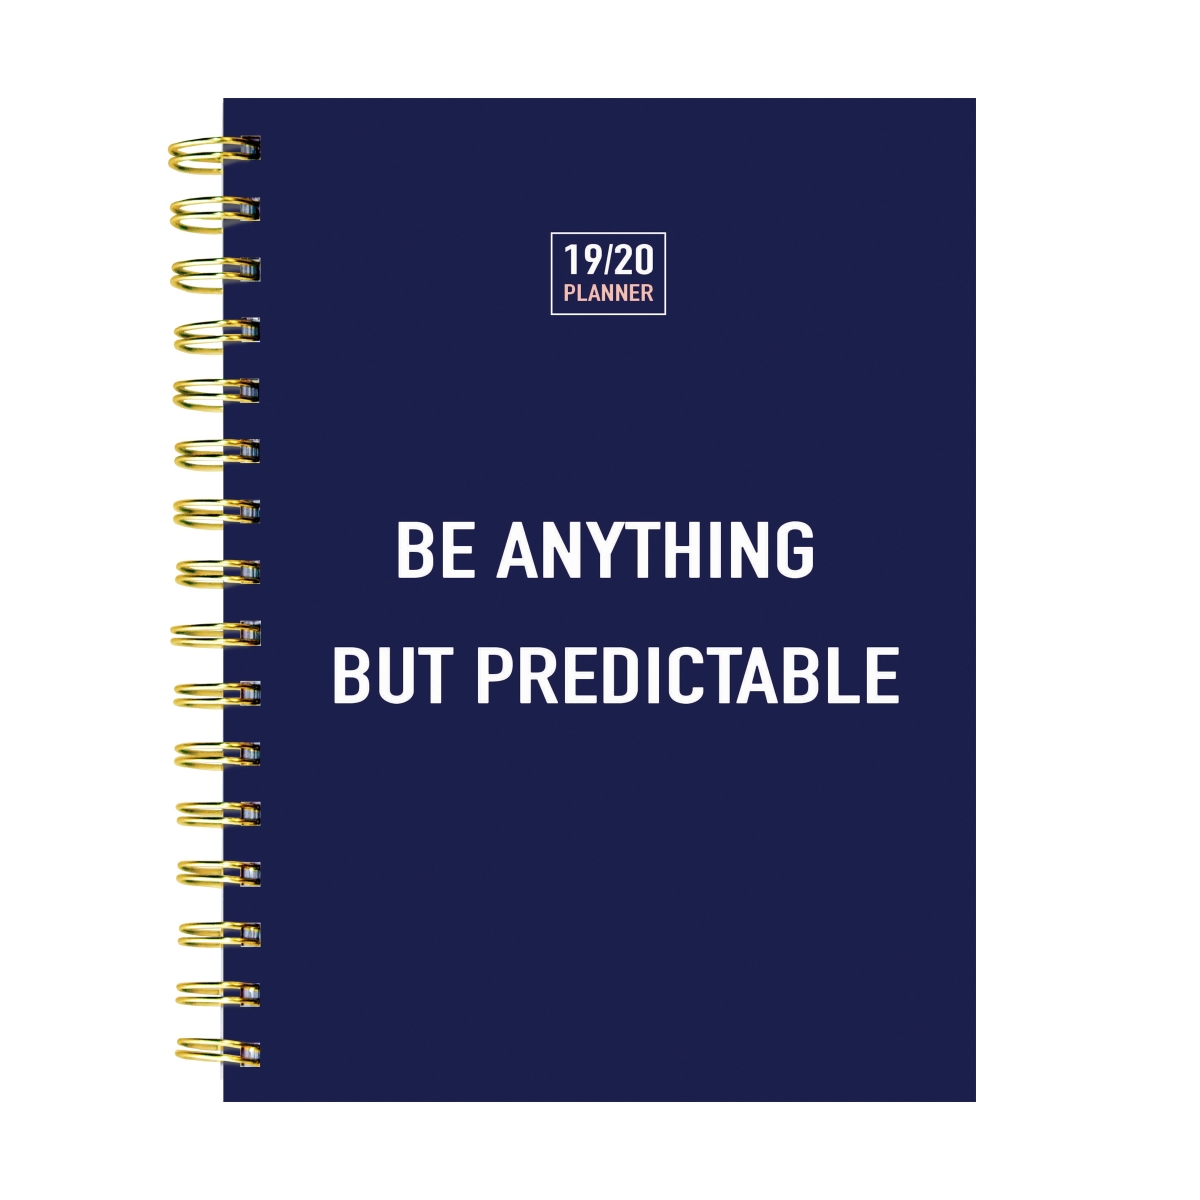 20-9037a July 2019 - June 2020 Not So Predictable Navy Medium Daily Weekly Monthly Planner